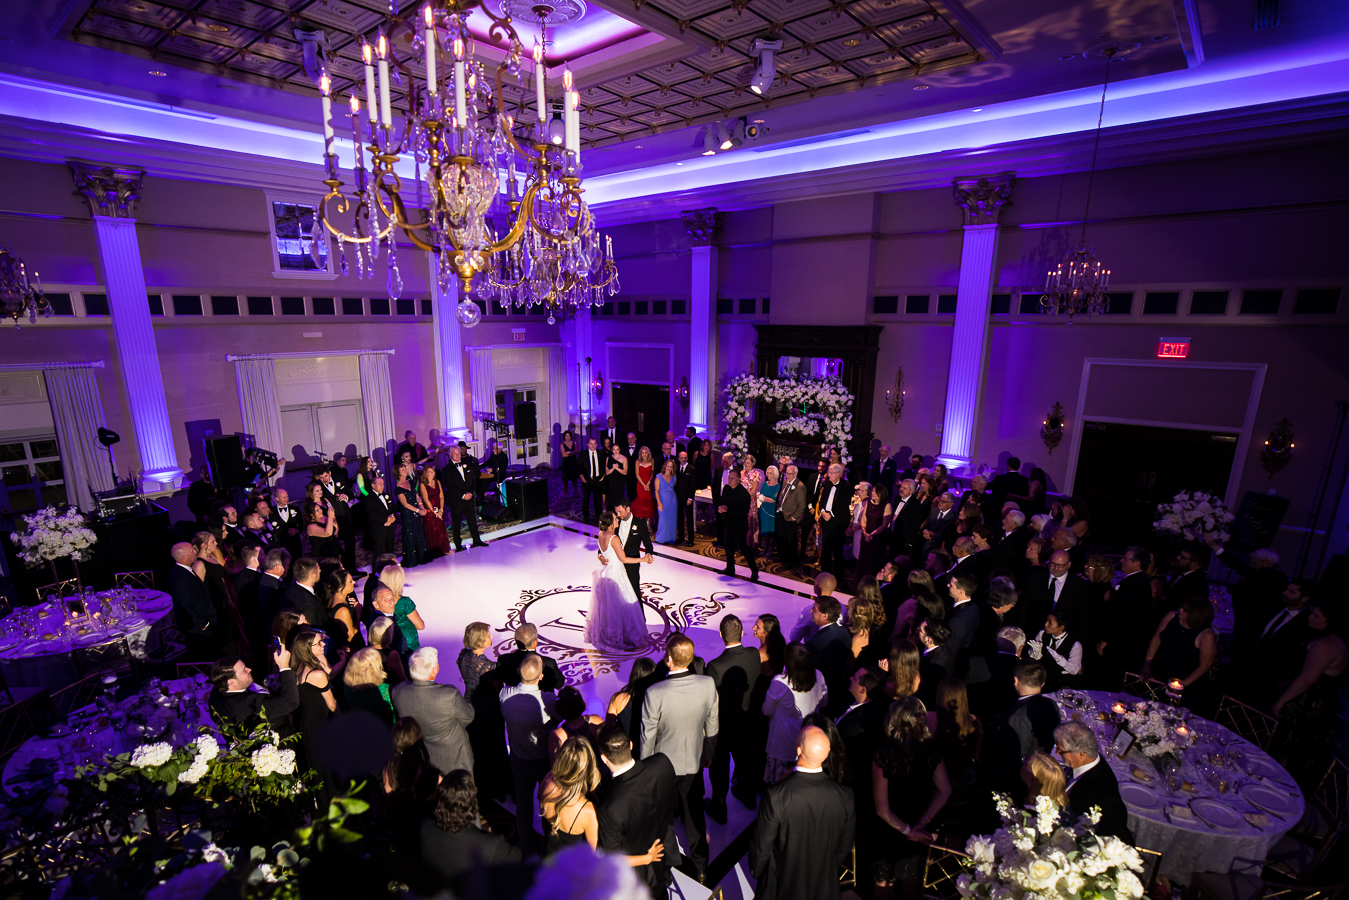 nj wedding photographer, lisa rhinehart, captures this unique, aeriel shot of the bride and groom as they share their first dance together as guests crowd around to watch them during this palace wedding reception in somerset nj